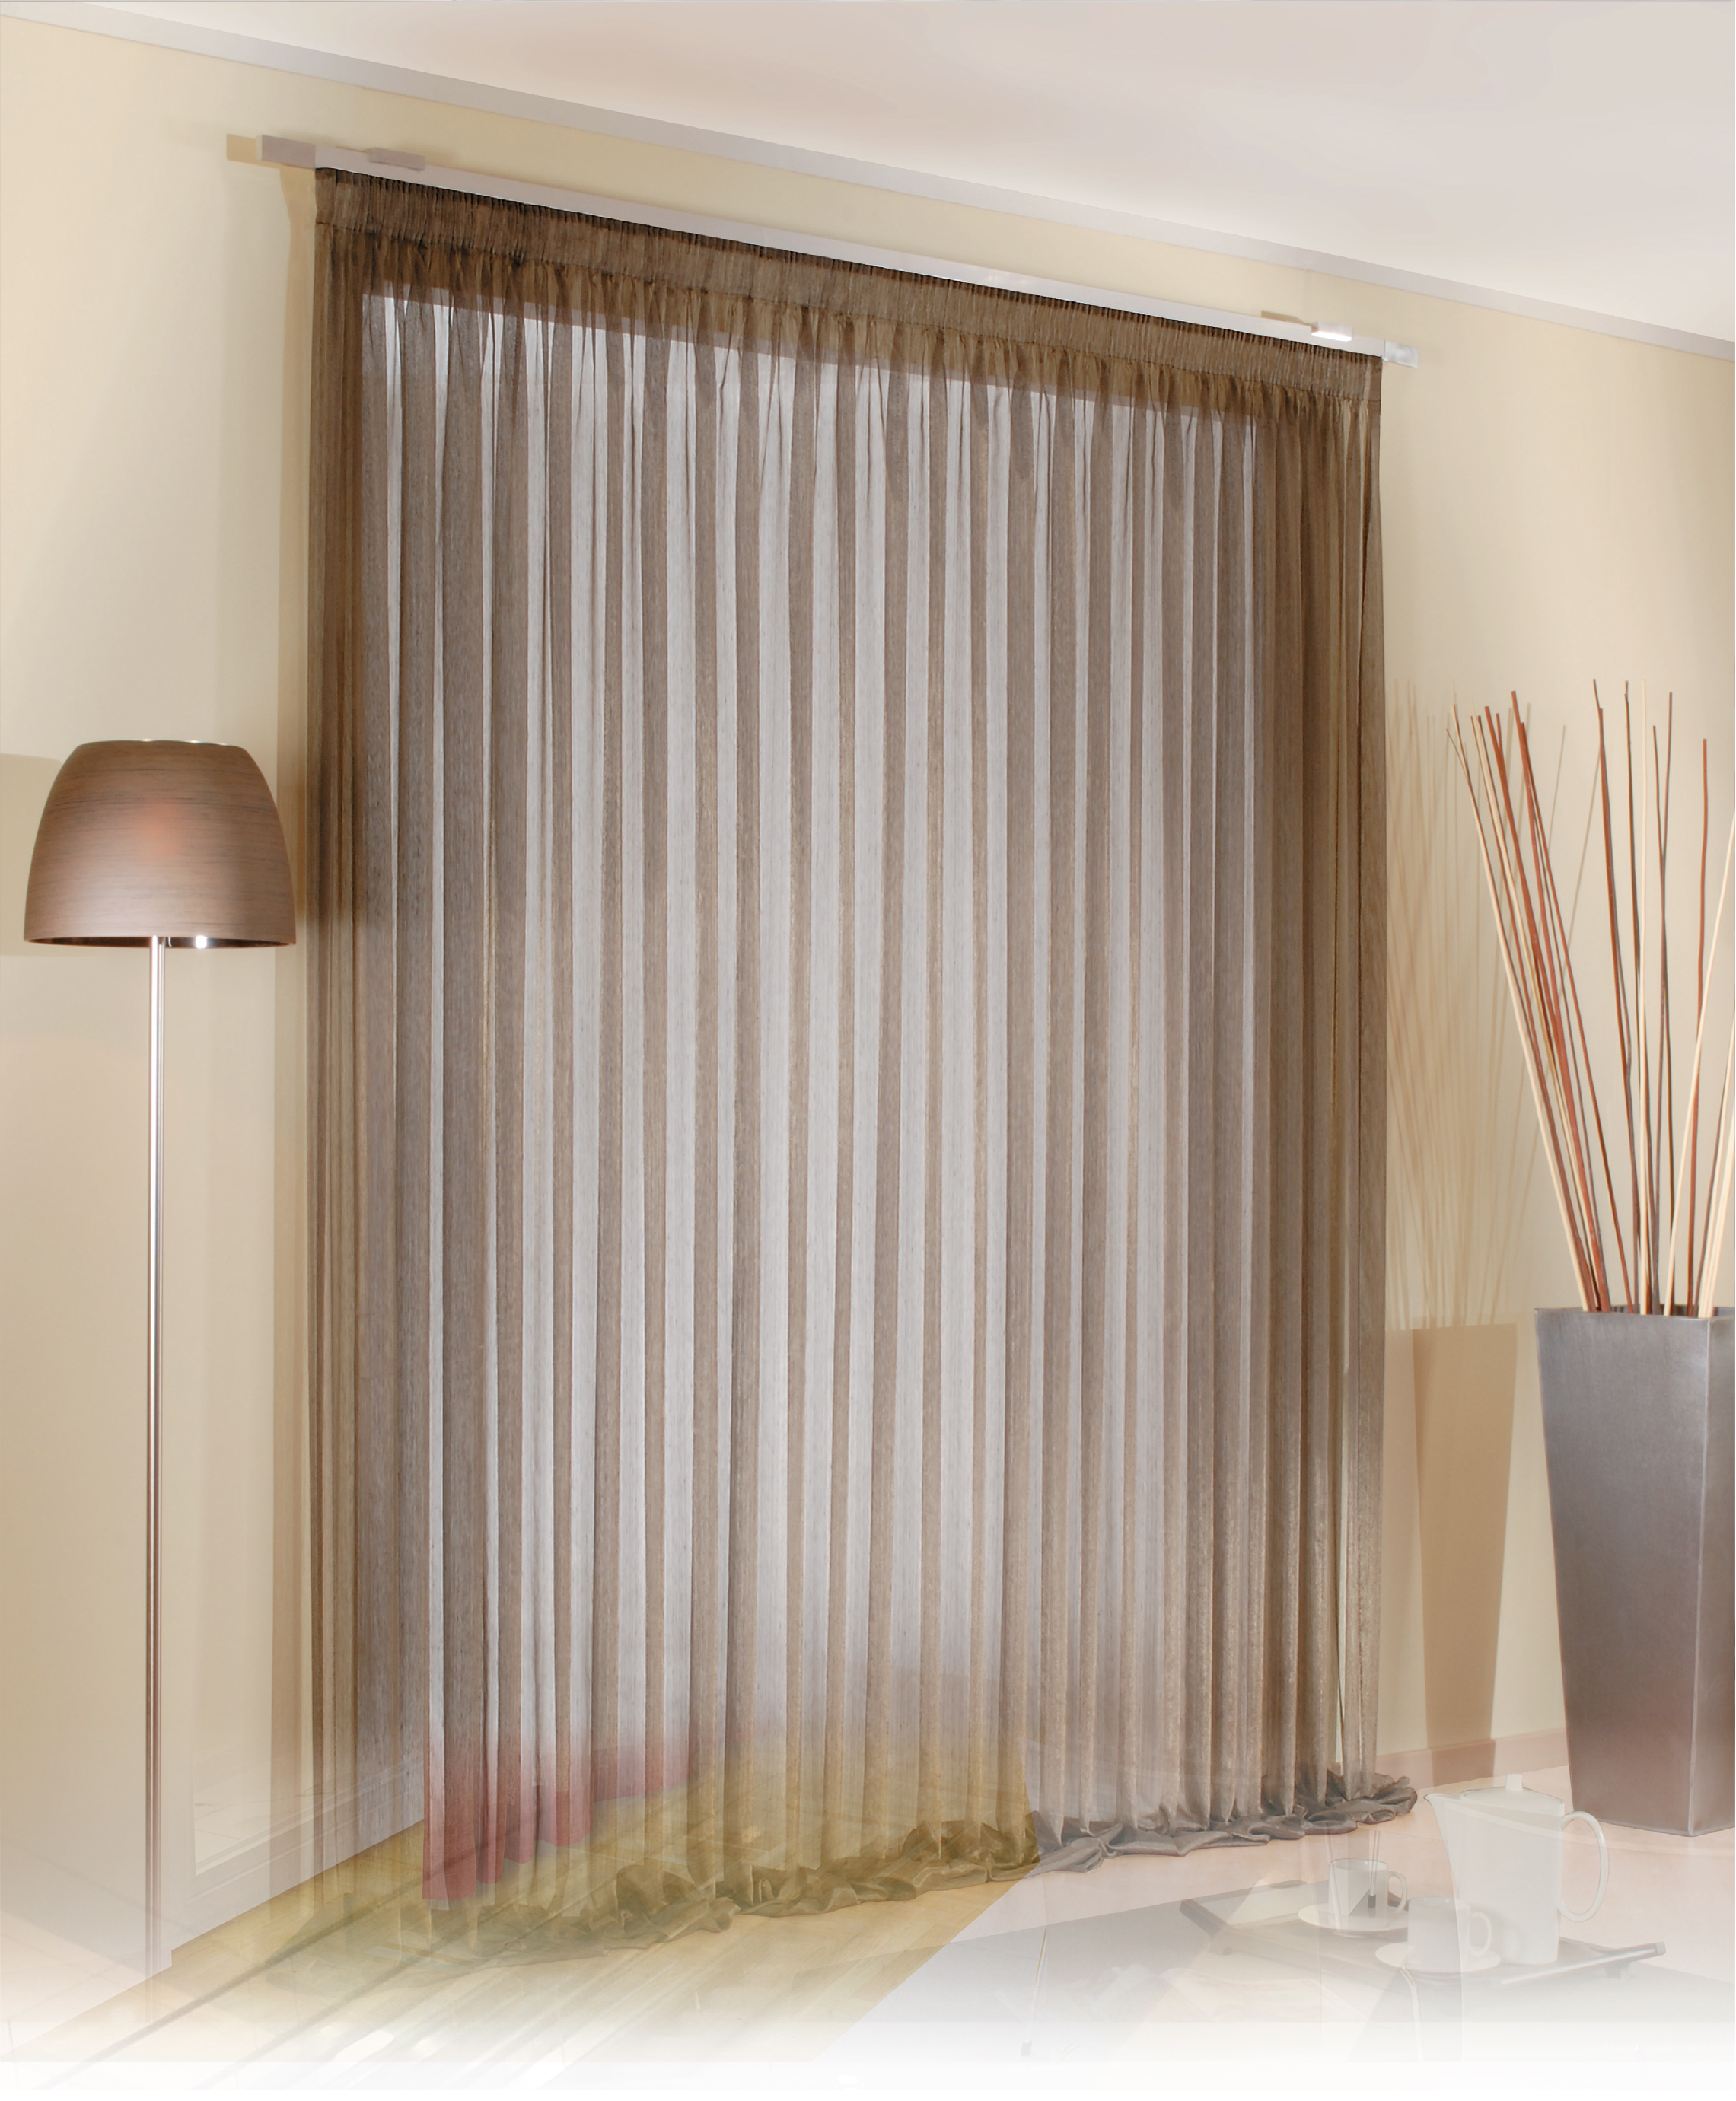 6.How can you integrate your curtains with other technology?